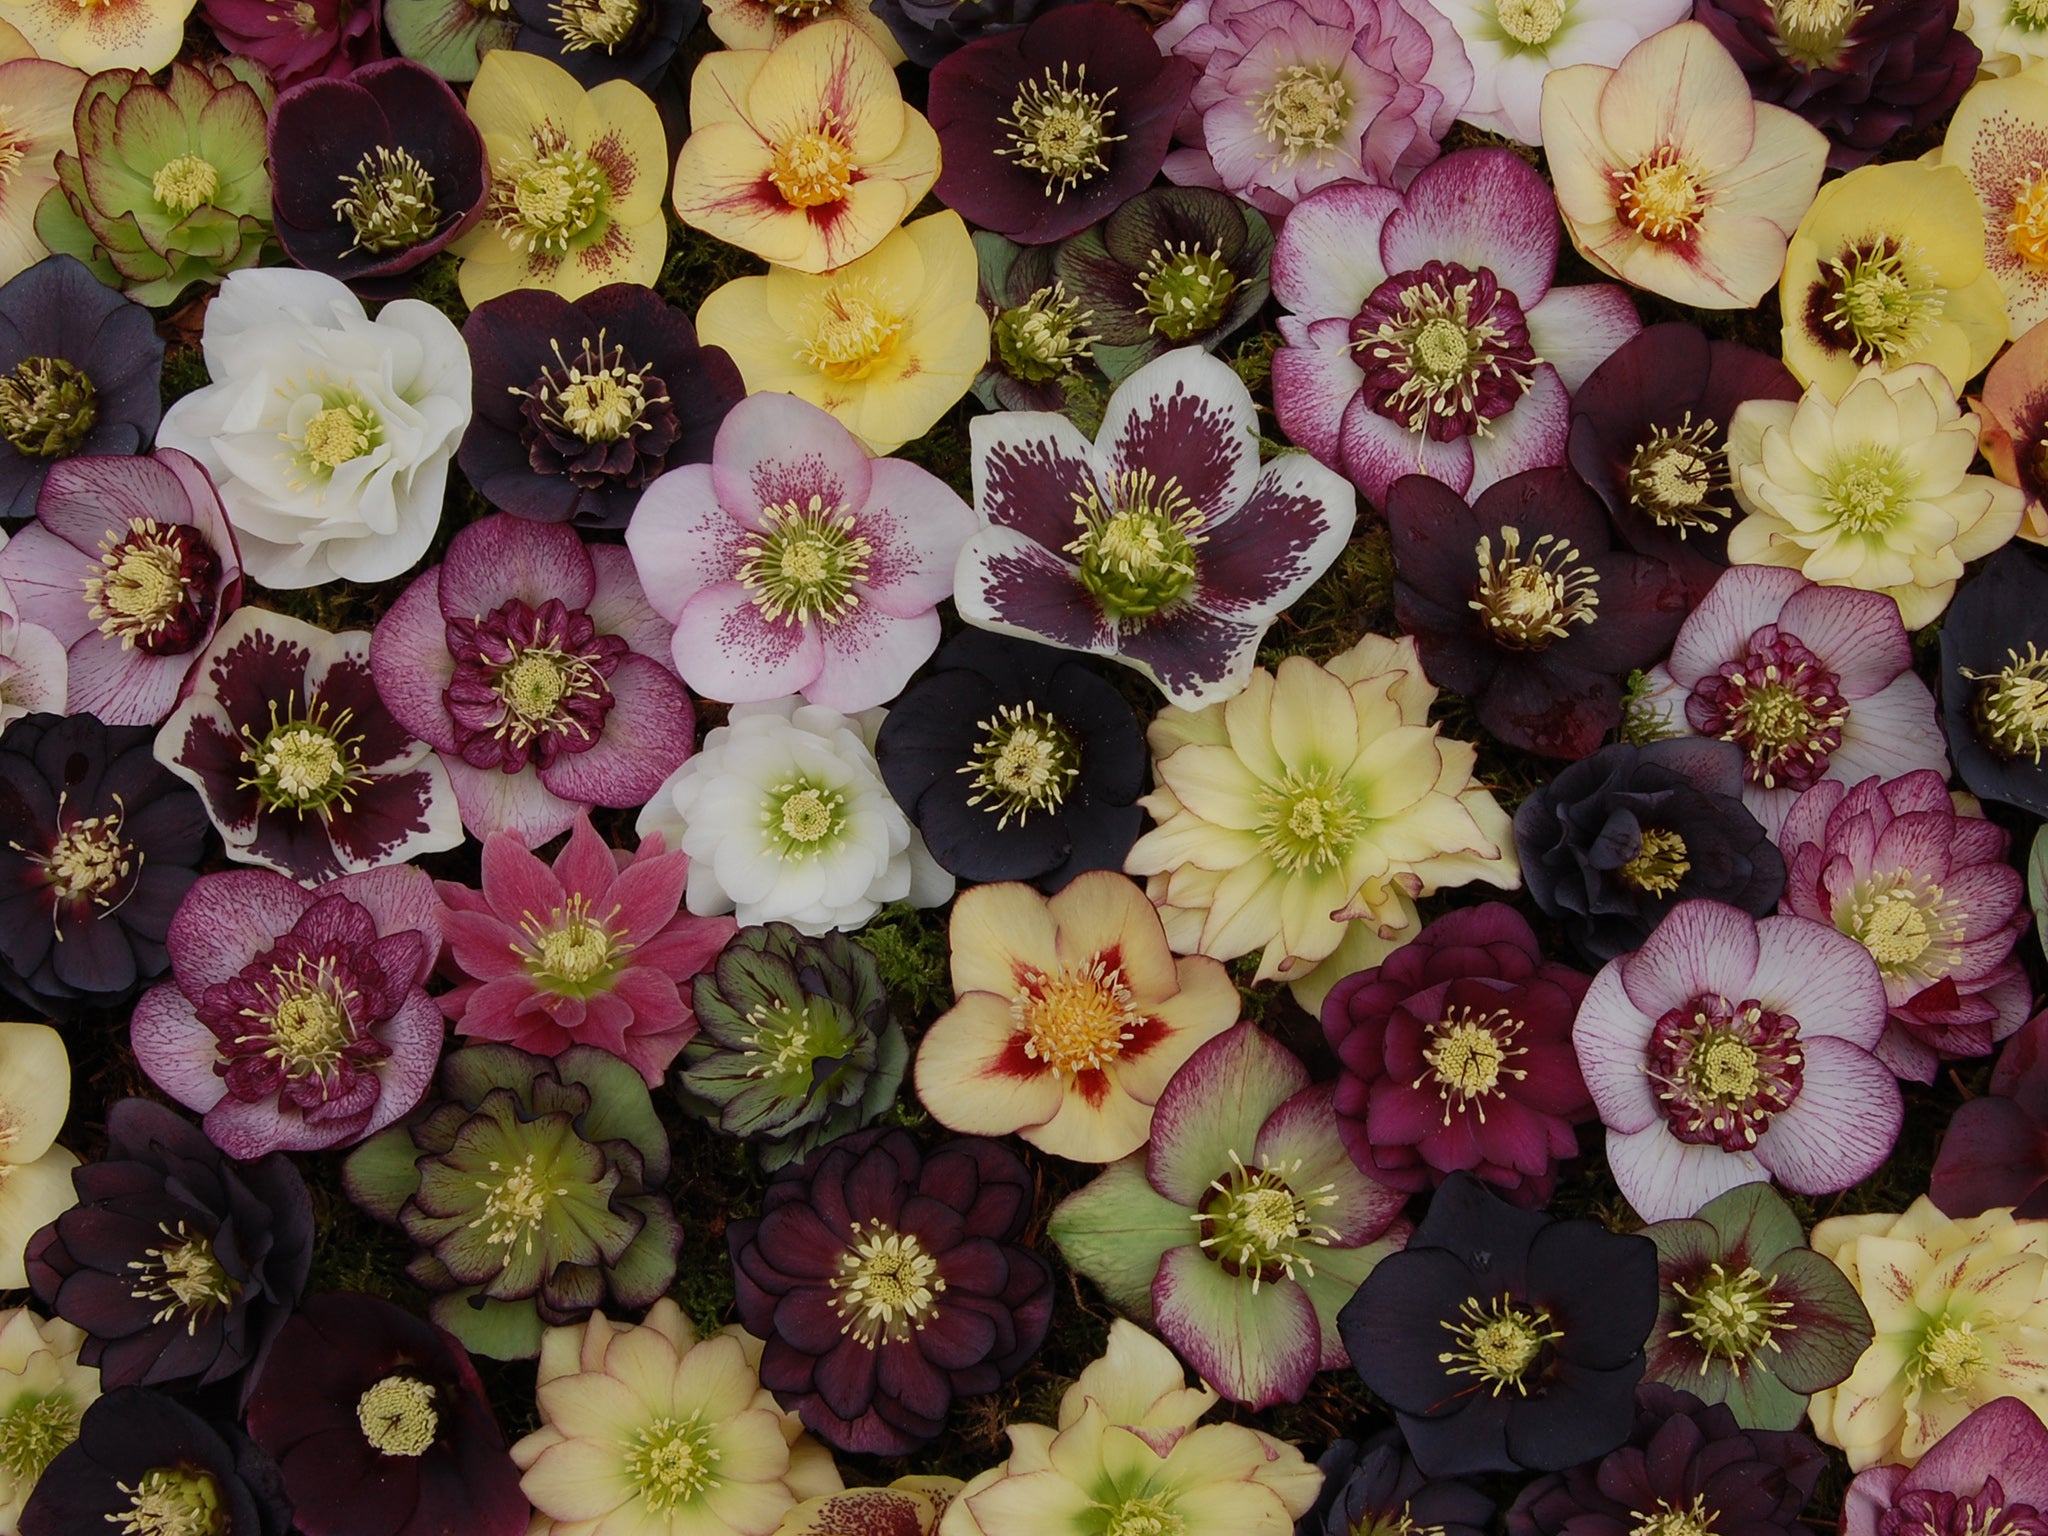 Some nurseries have spent almost 30 years perfecting Lenten rose hybrids